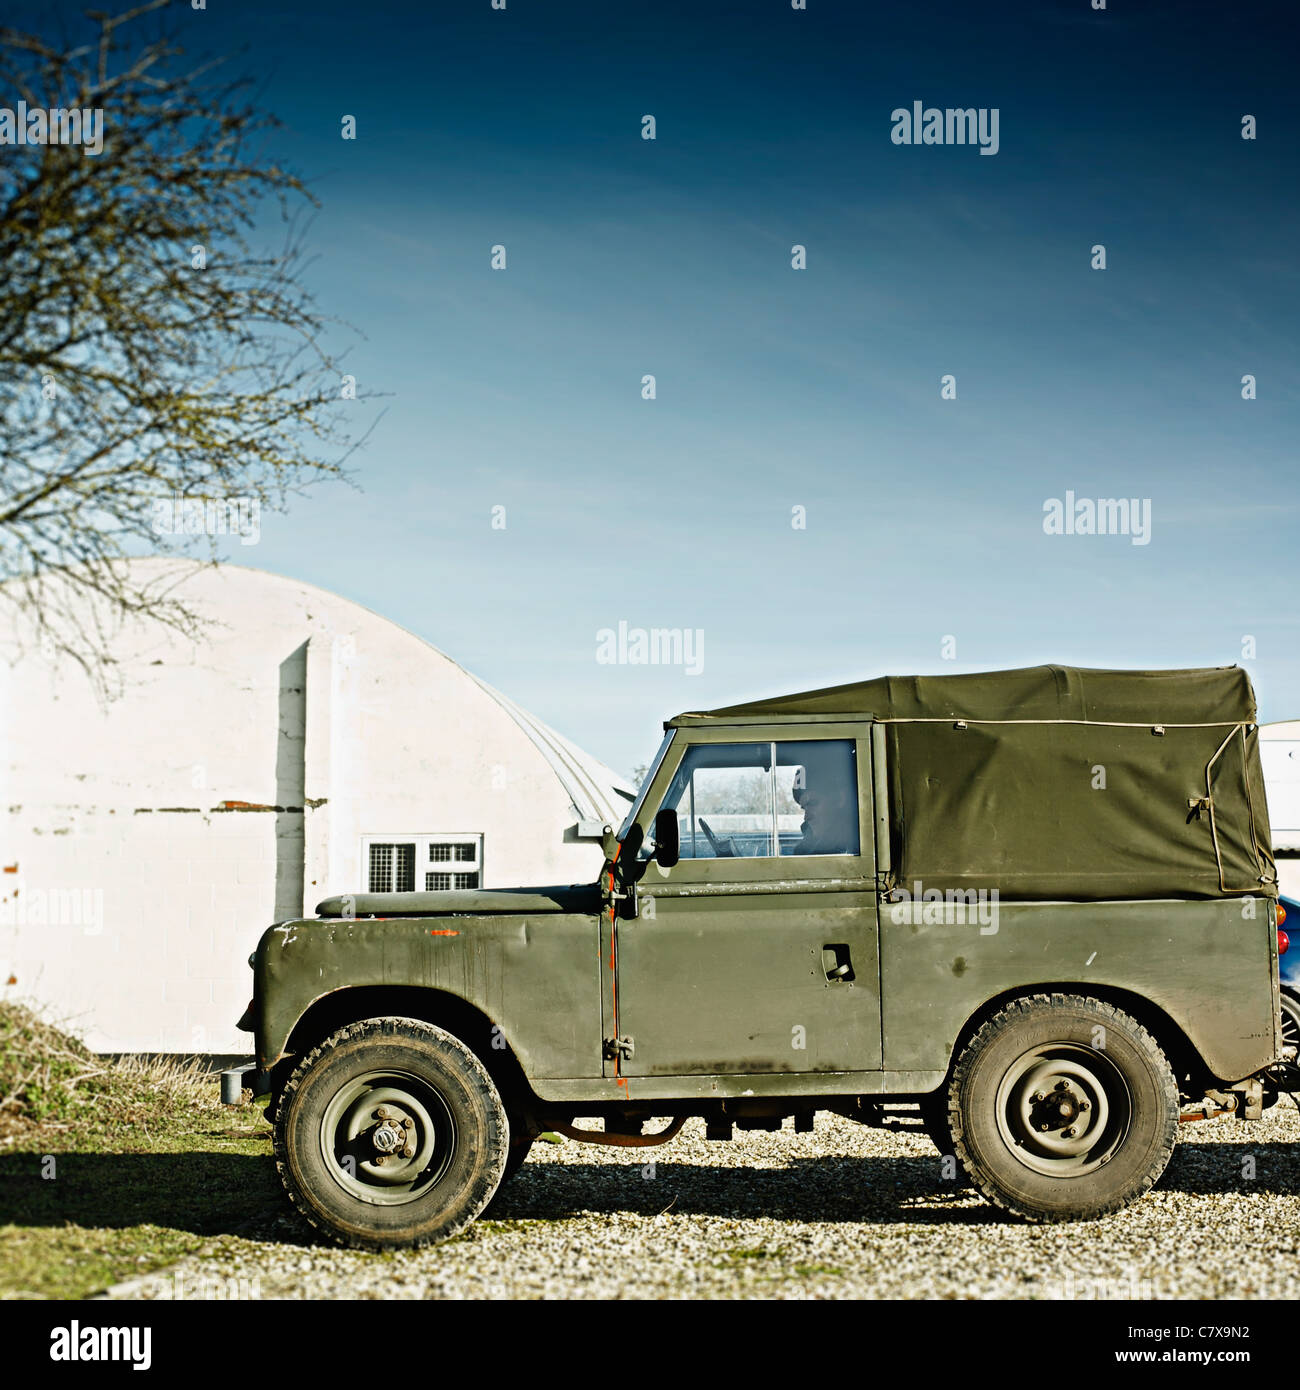 1970's Land Rover Defender Profile shot on a sunny day outside a Nissan hut building. Army green with material roof. Stock Photo